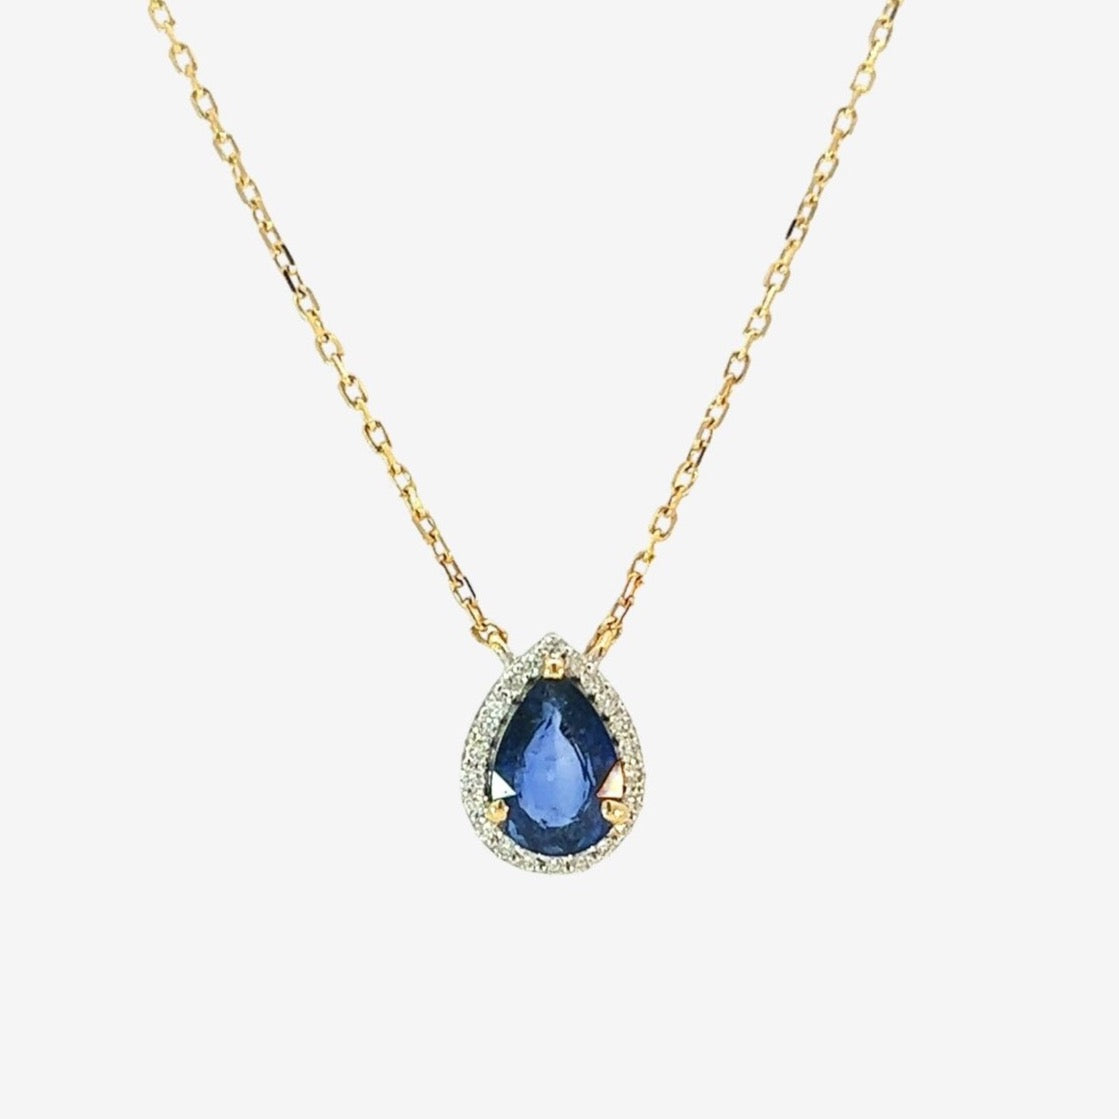 Garda Necklace in Diamond and Sapphire - 18k Gold - Lynor